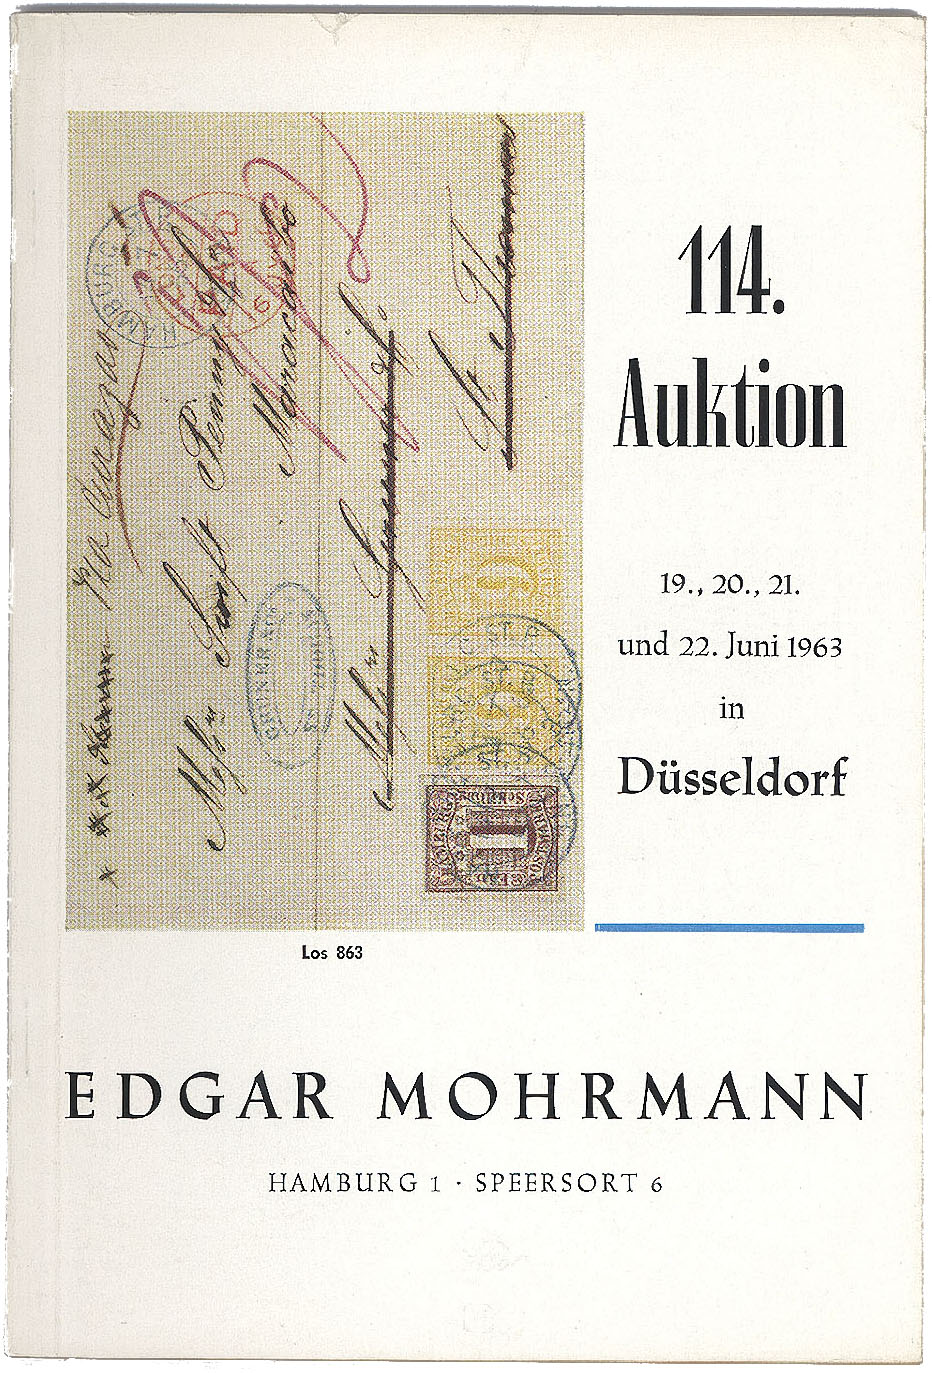 titel page of the catelogue for the 114th Edgar Mohrman auction (June 1963)